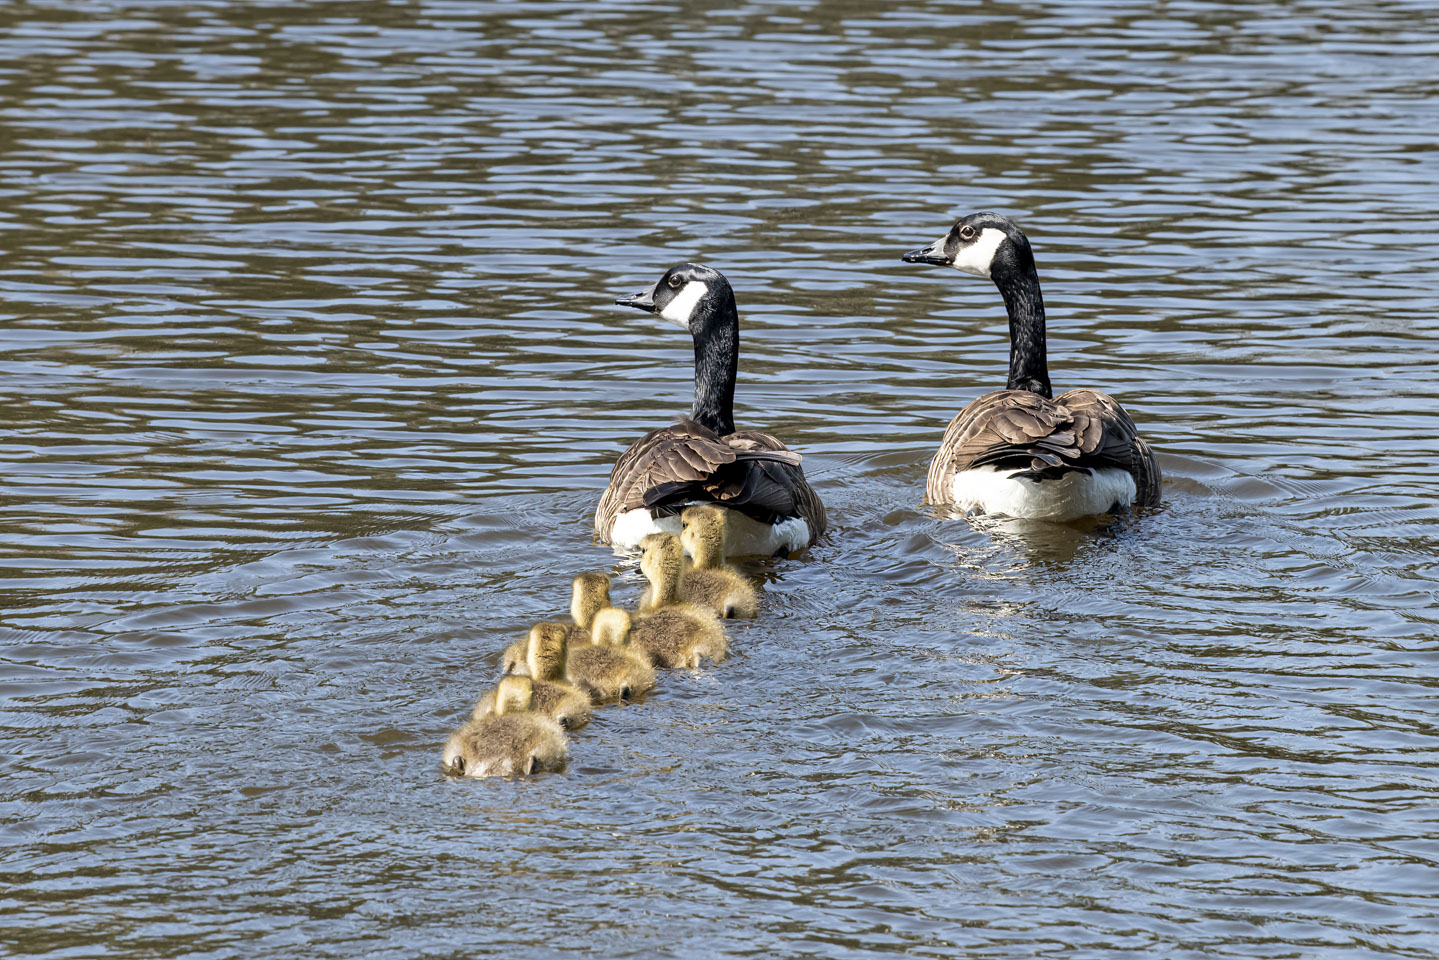 Canada Geese with goslings following in the water